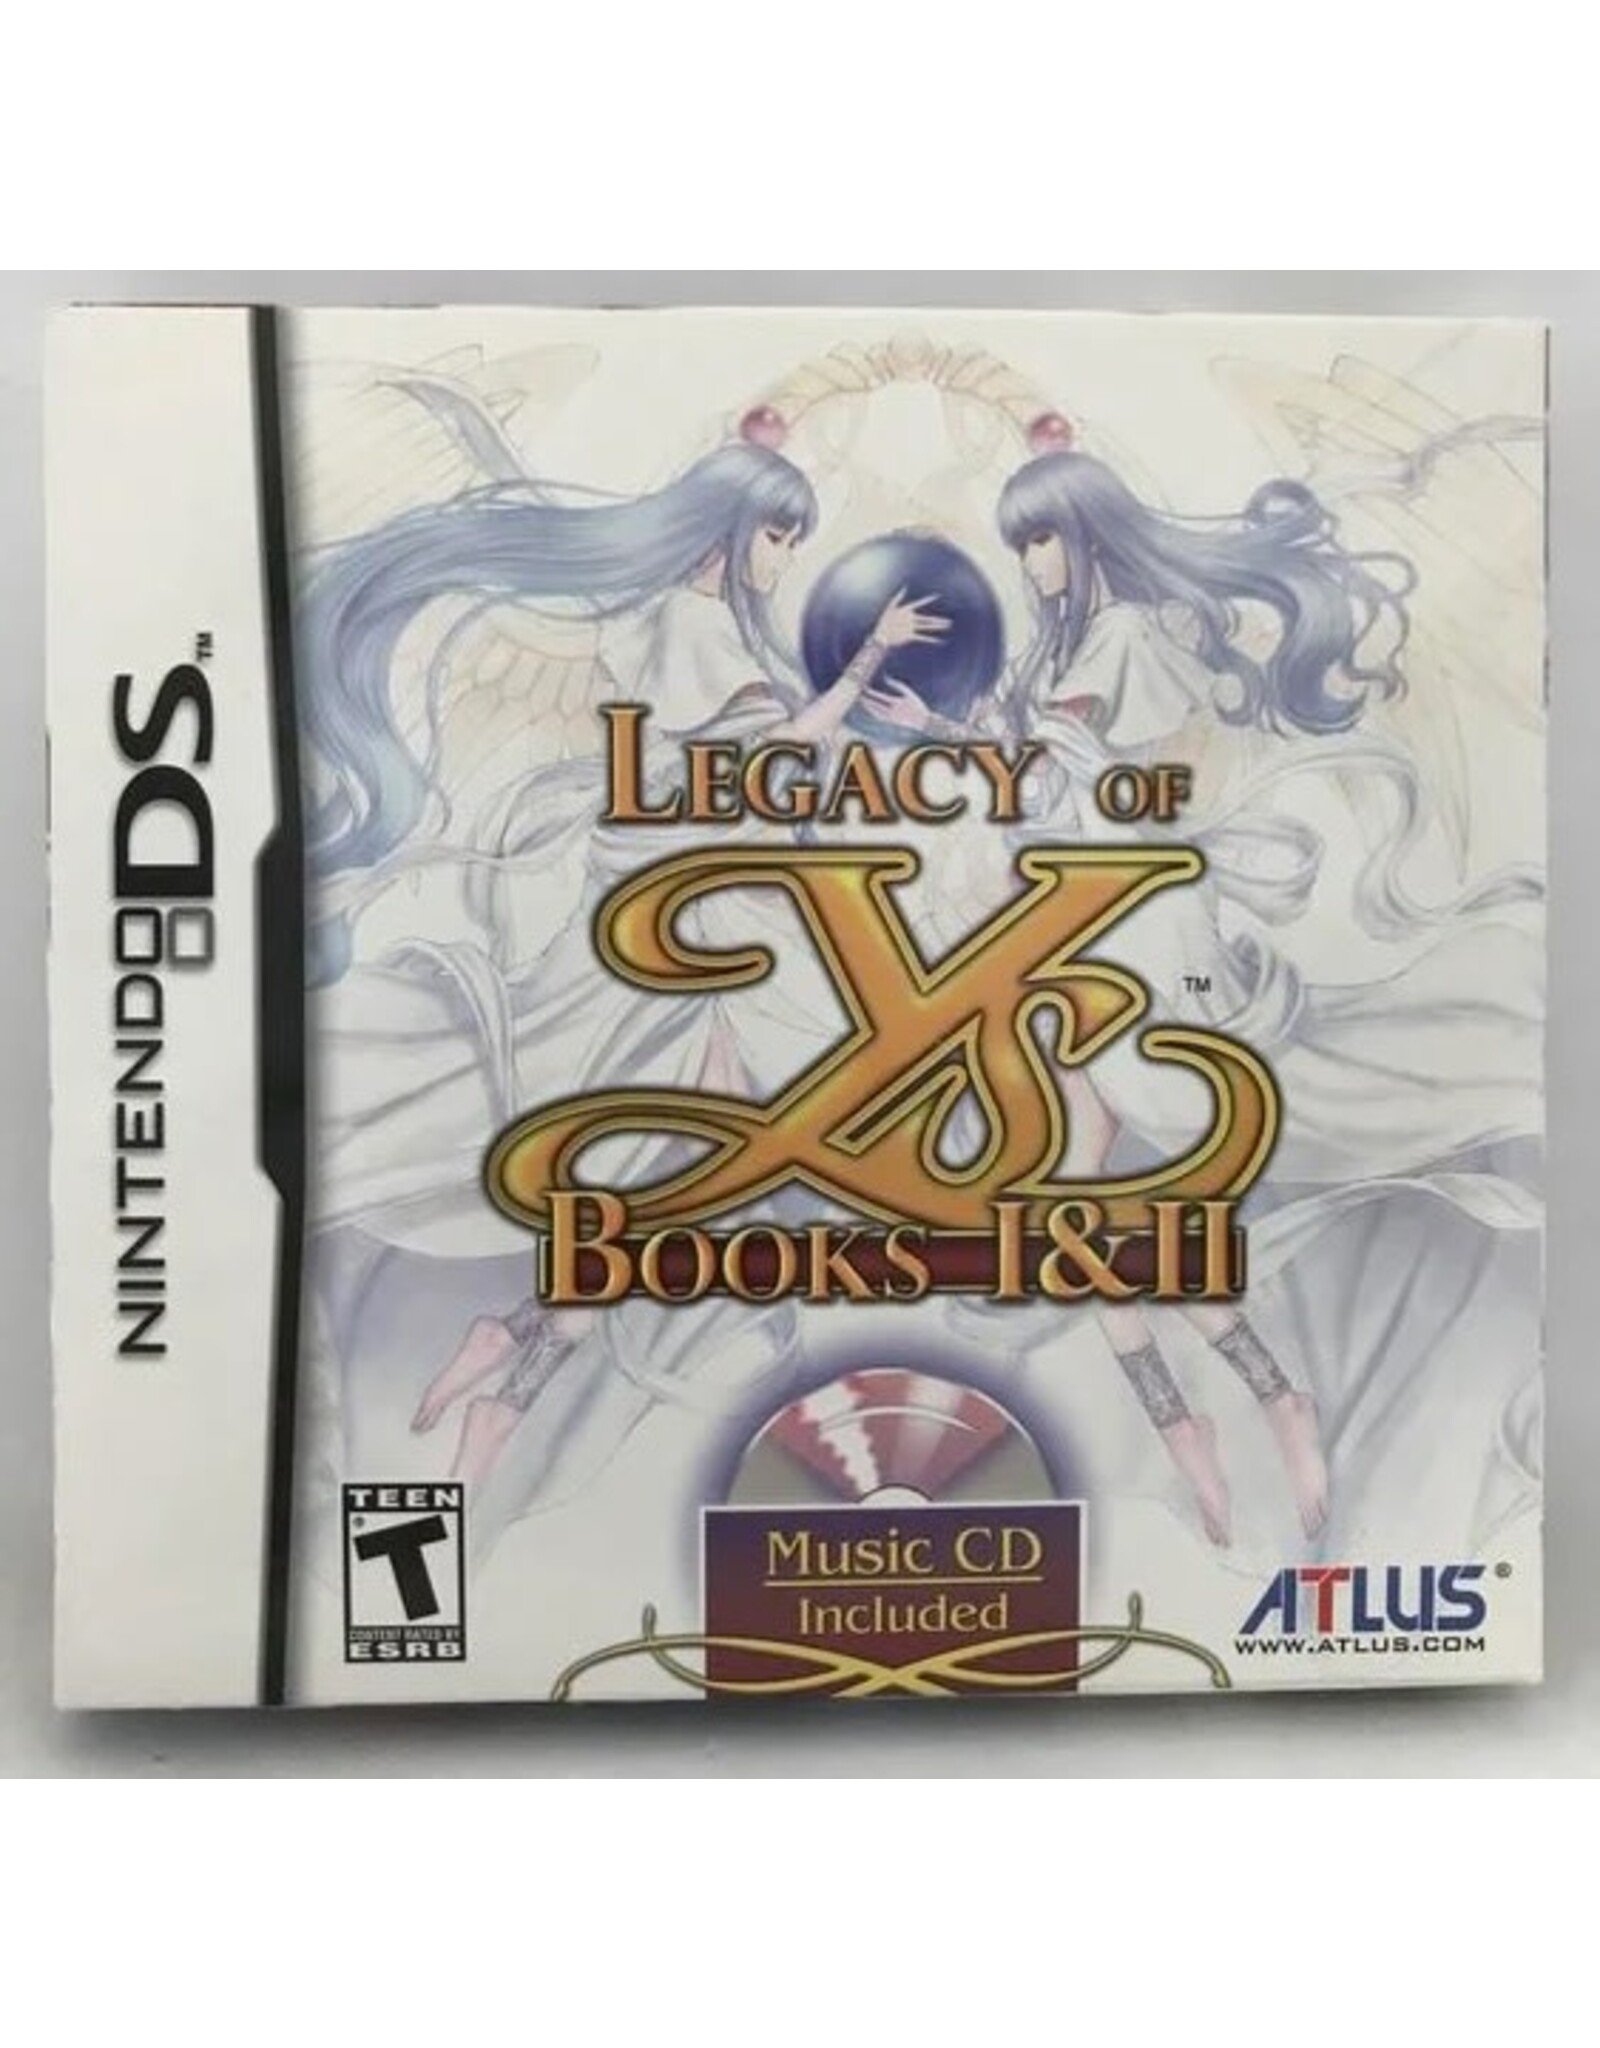 Nintendo DS Legacy of Ys: Books I & II Launch Edition - Missing Soundtrack (Used)